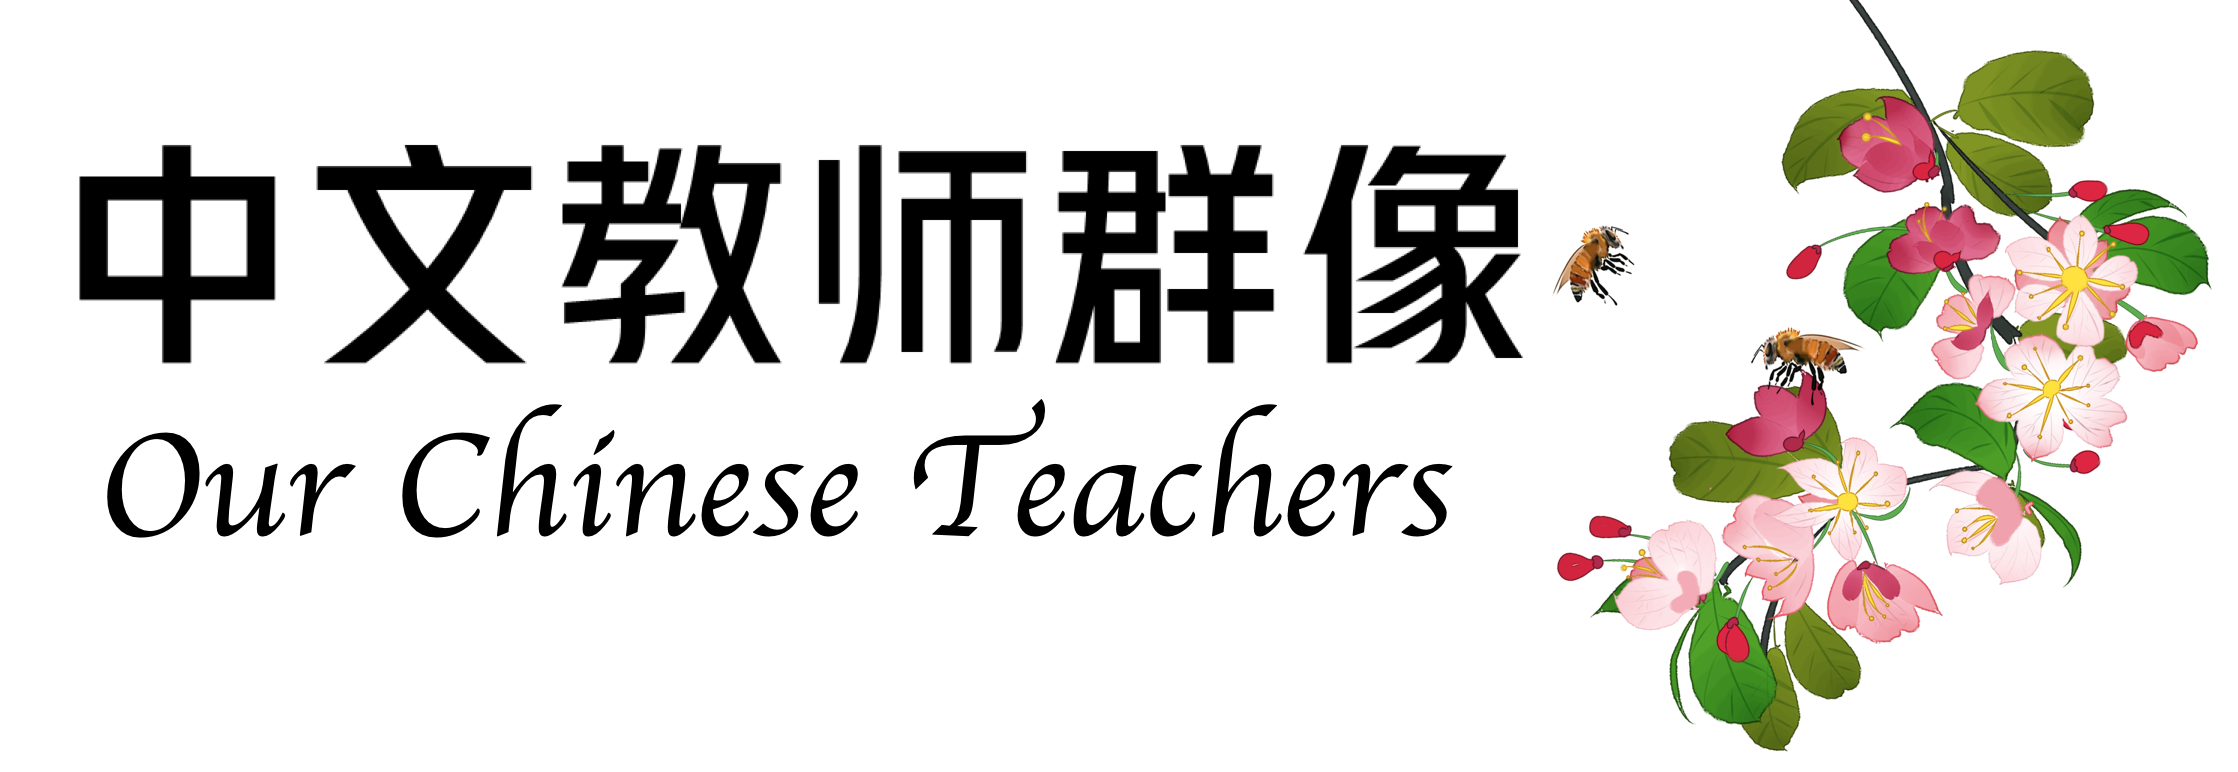 Our Chinese Teachers.png